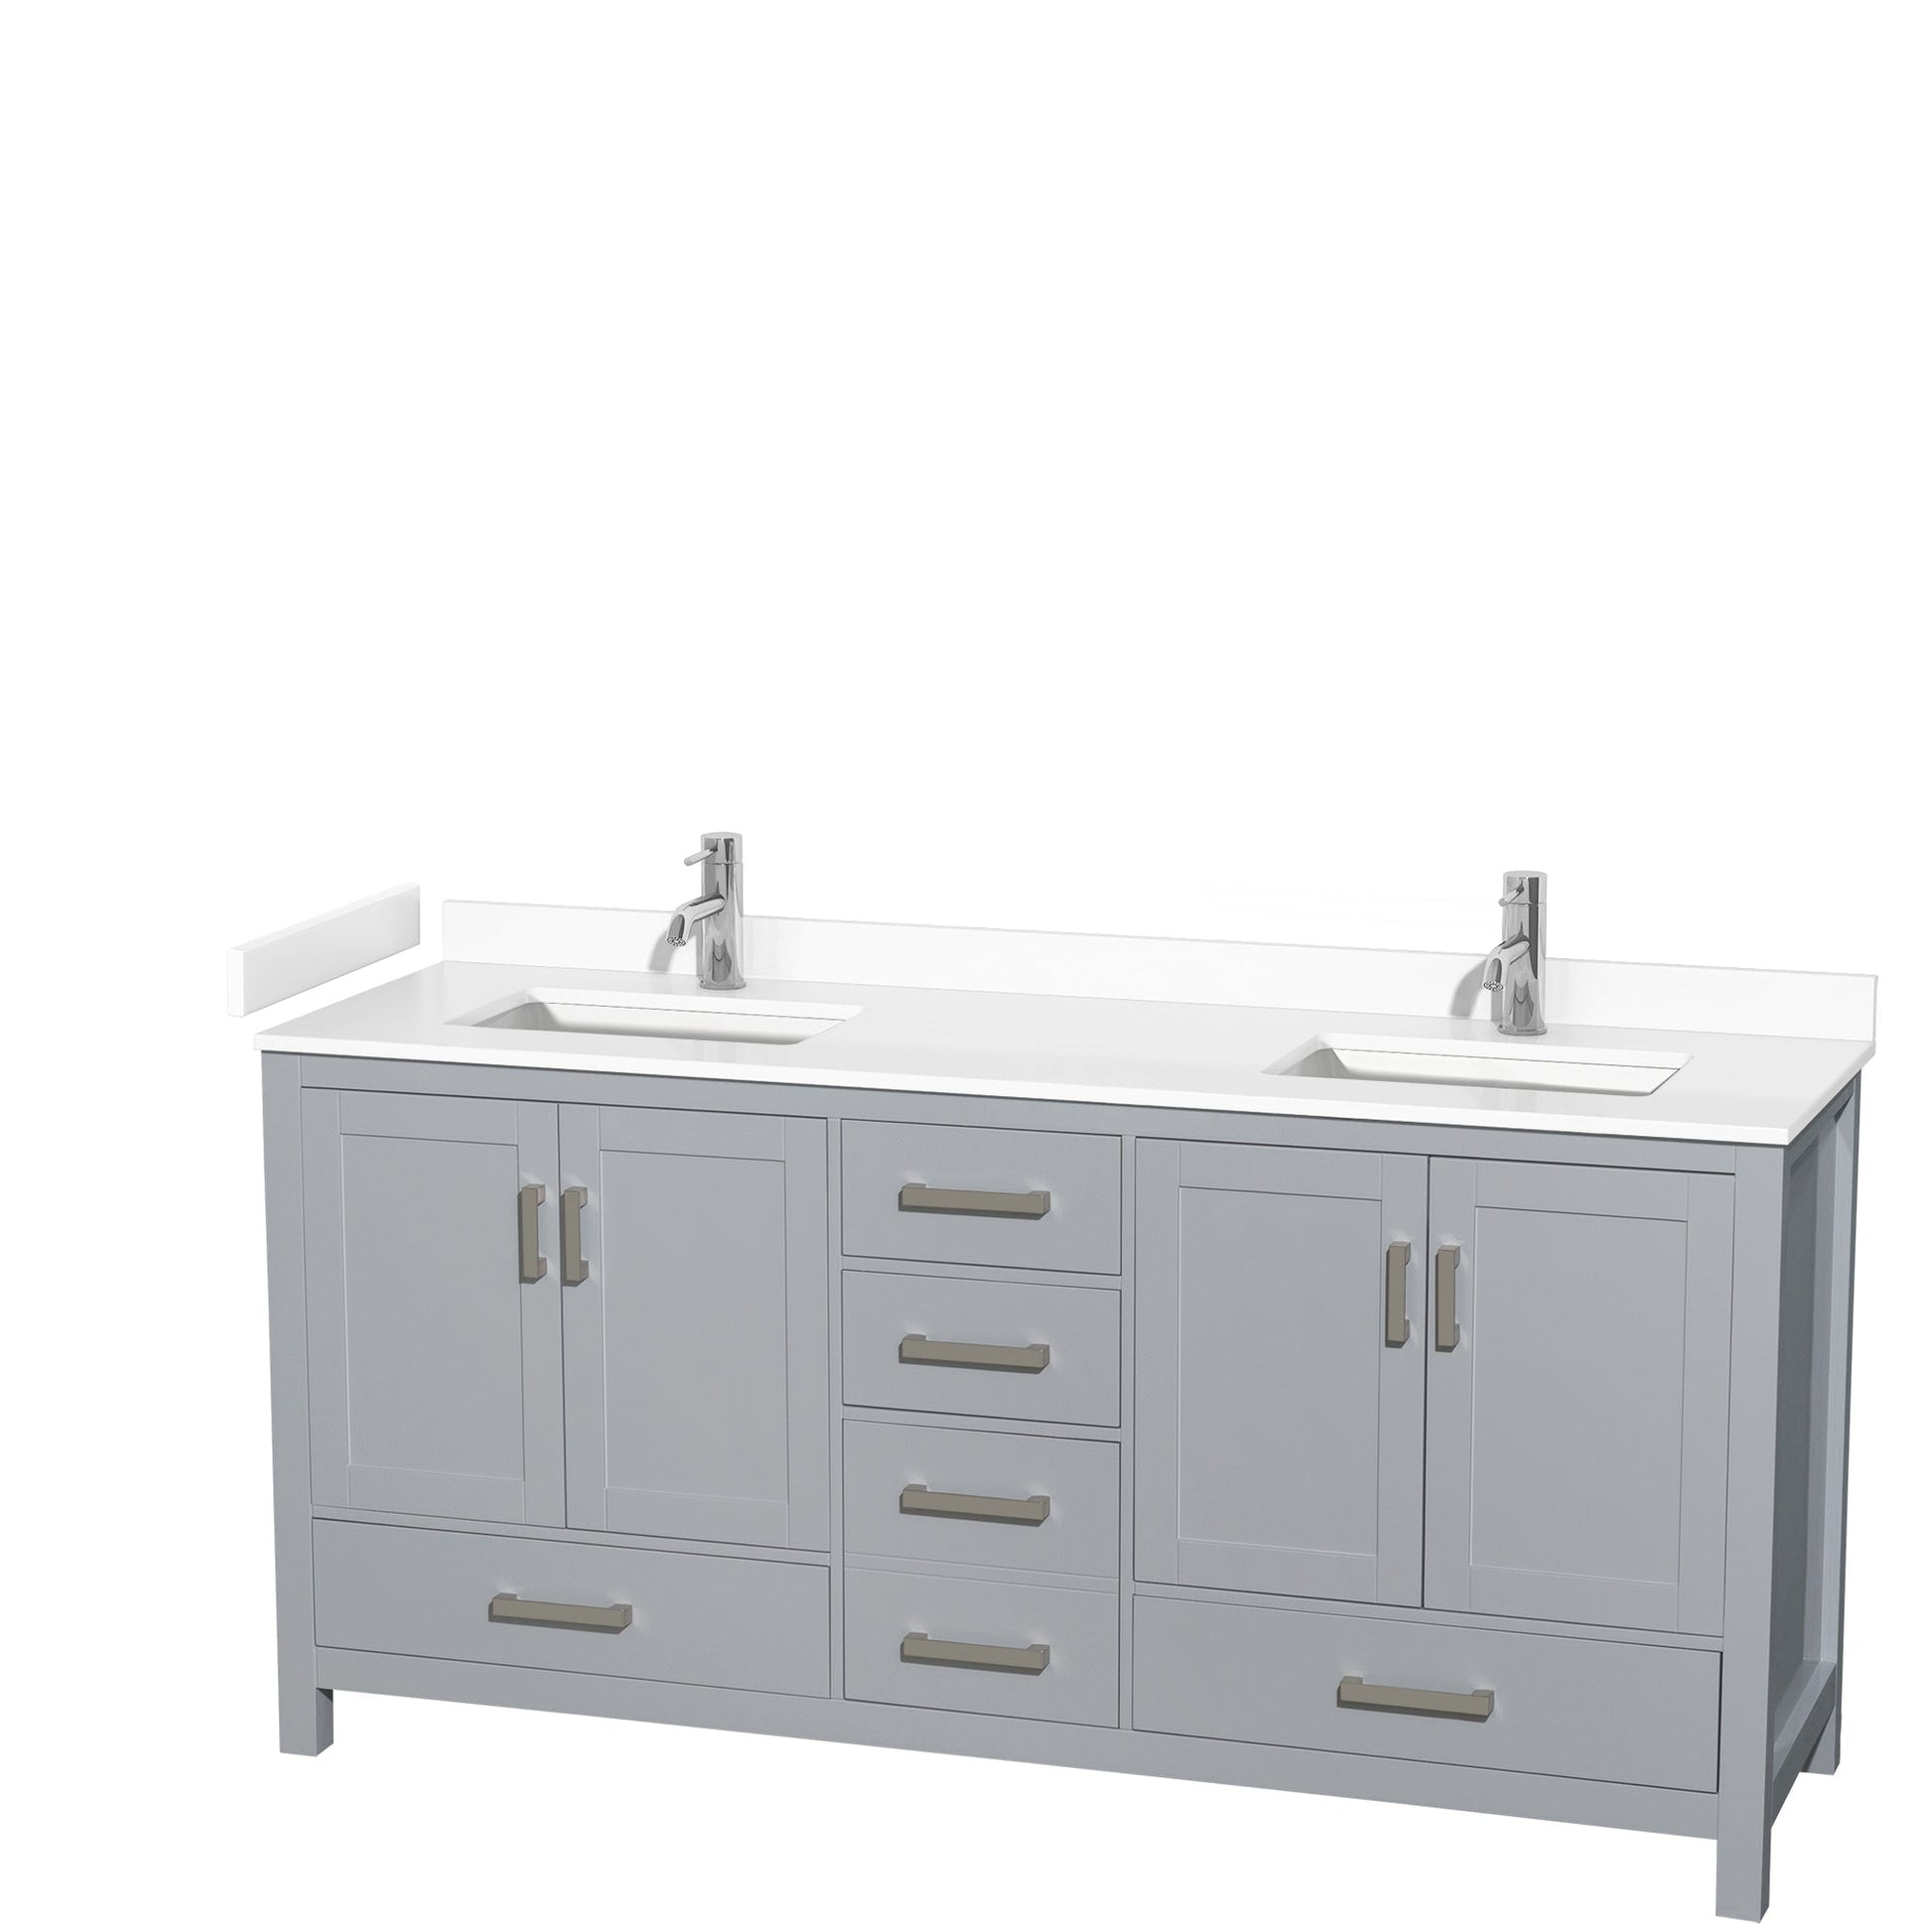 Wyndham Collection Sheffield 72" Double Bathroom Vanity in Gray, White Cultured Marble Countertop, Undermount Square Sinks, No Mirror